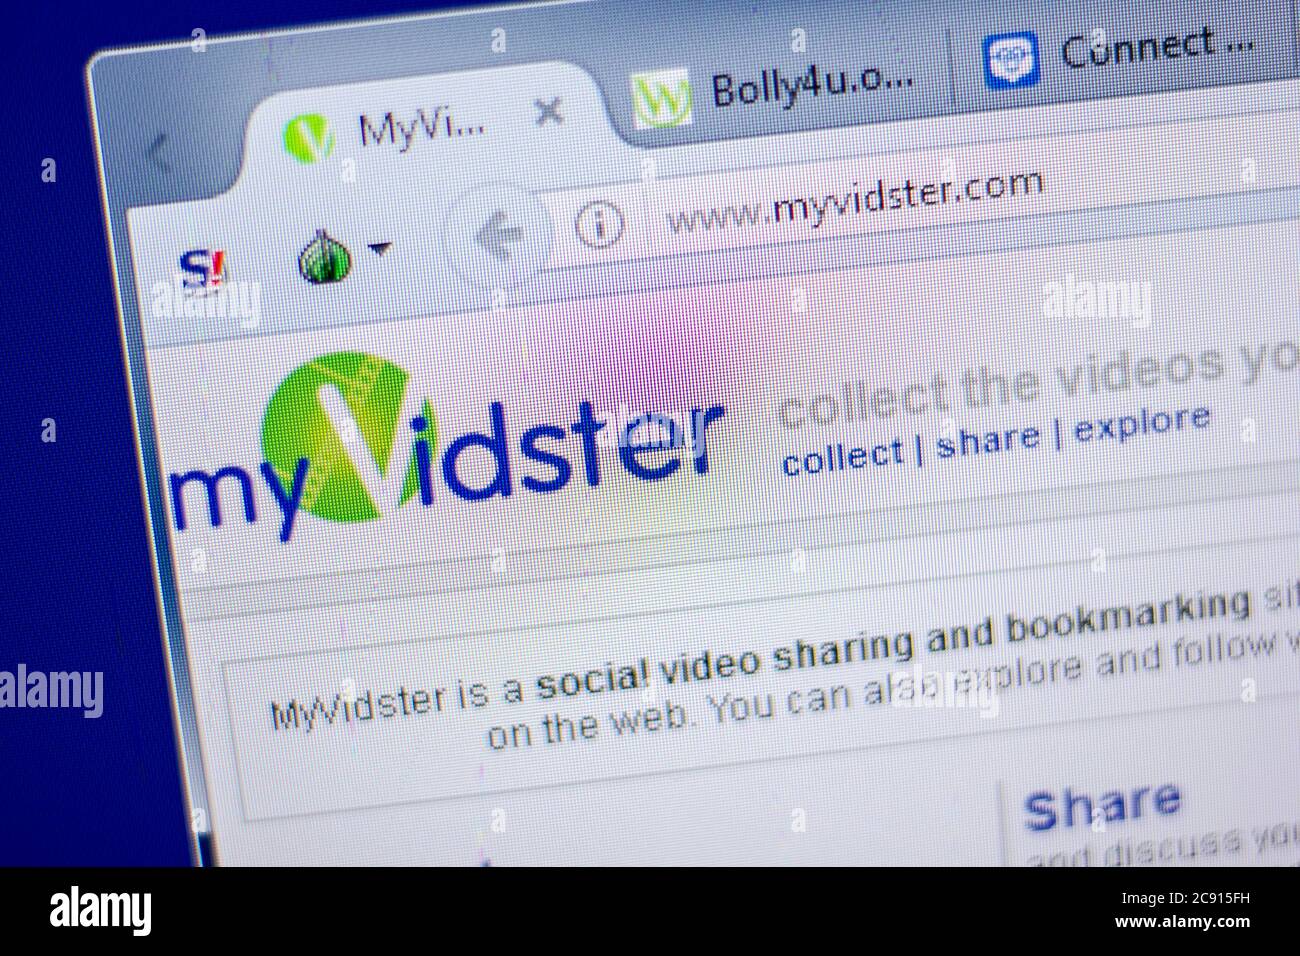 MyVidster Review